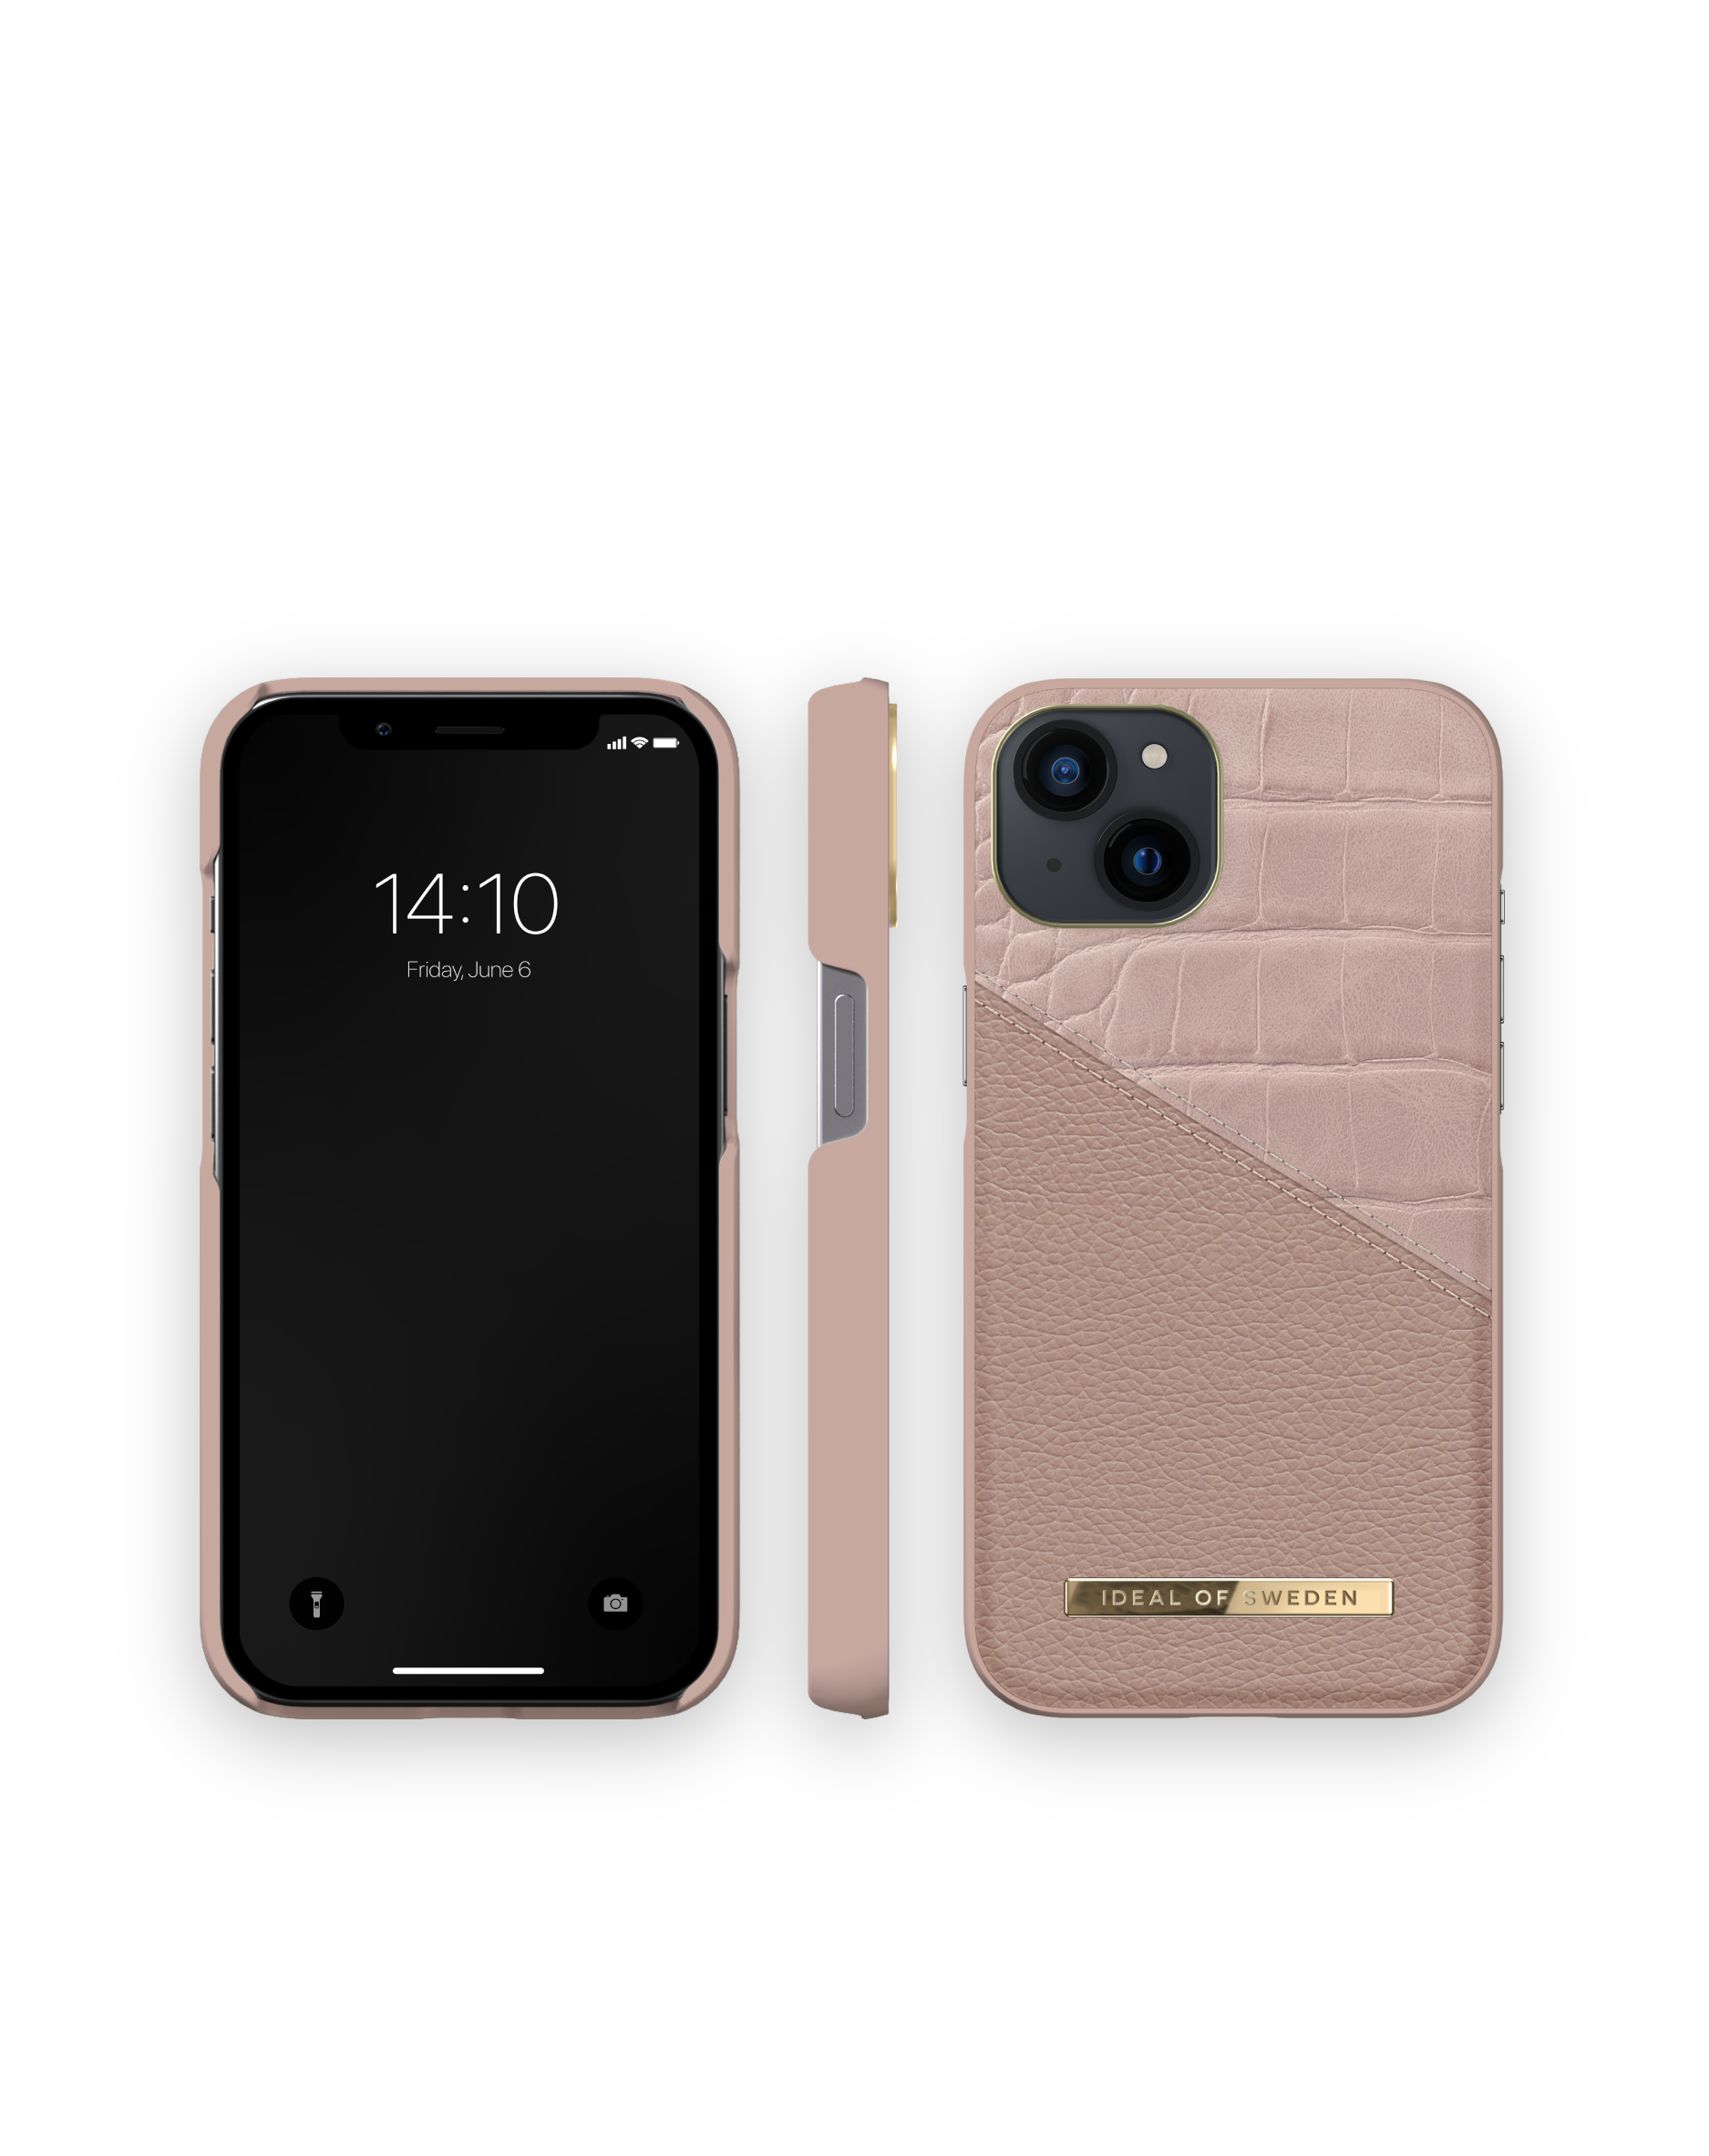 IDEAL 13, Smoke SWEDEN iPhone Rose Apple, IDACSS20-I2161-202, OF Backcover, Croco